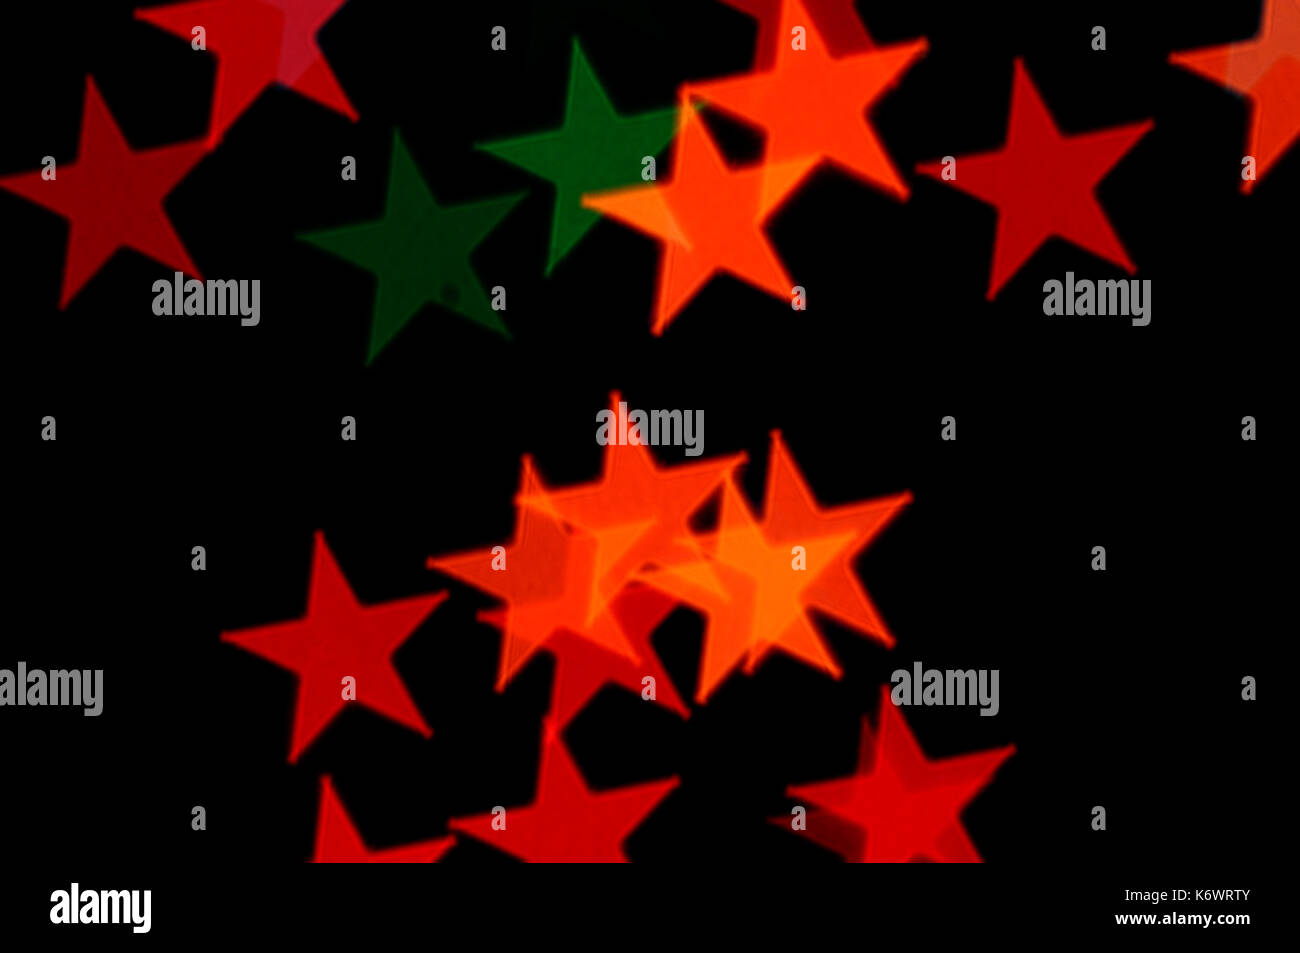 Colorful stars pattern abstract blur on black background. Stock Photo